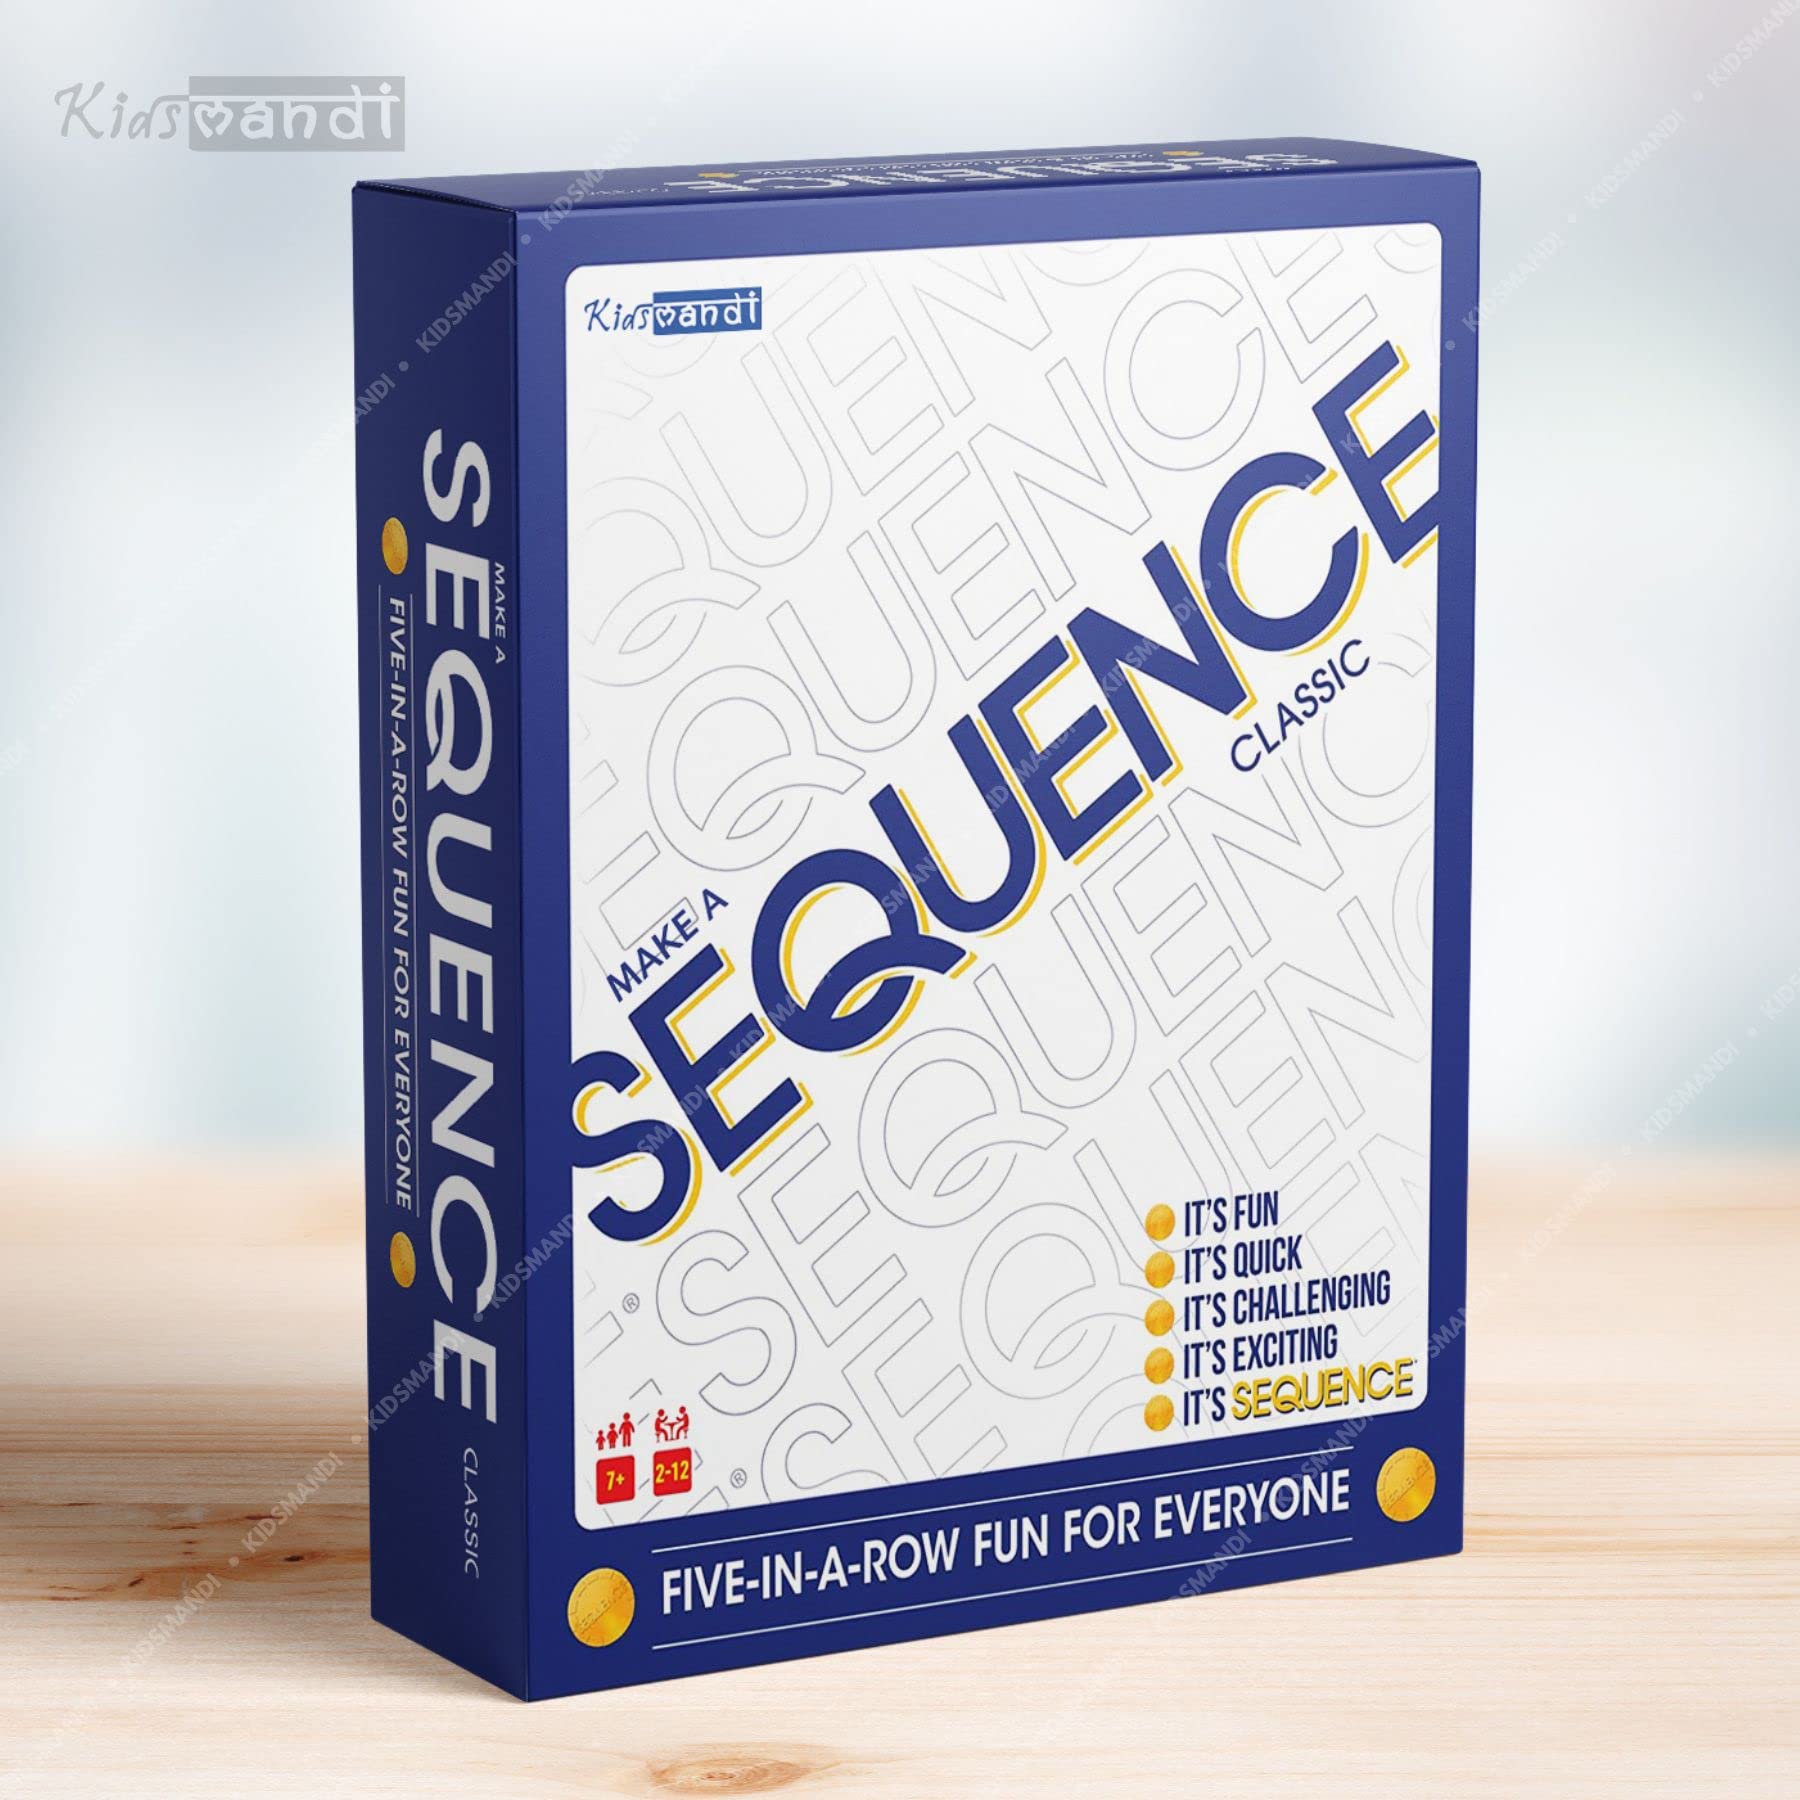 Kids Mandi sequence board game for children - fun and educational.